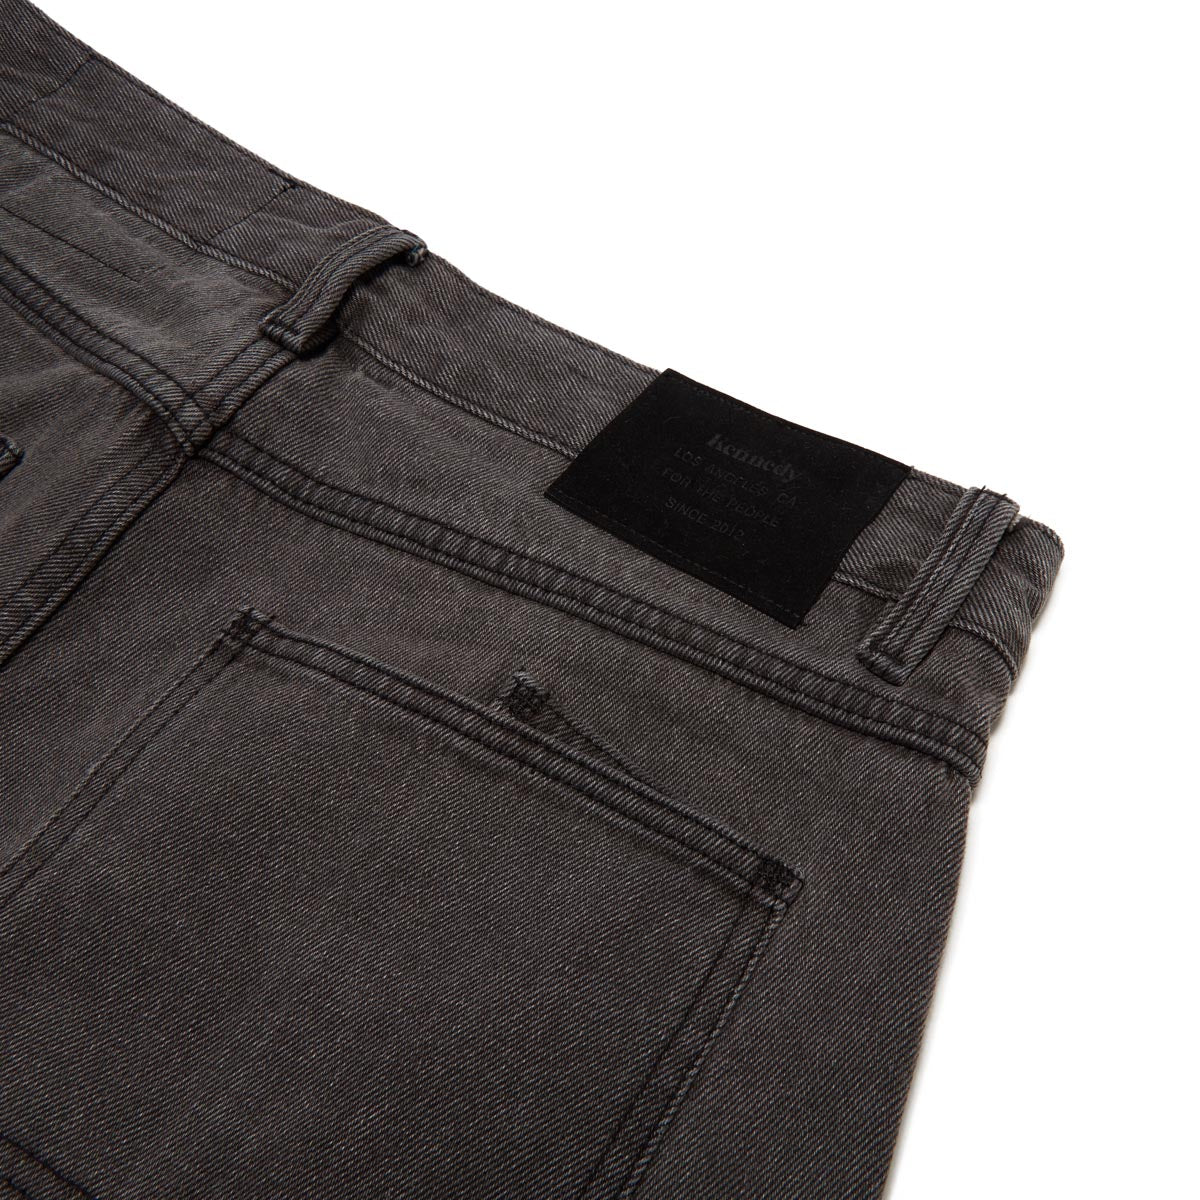 Kennedy The Wide Tapered Jeans - Black Flag image 4